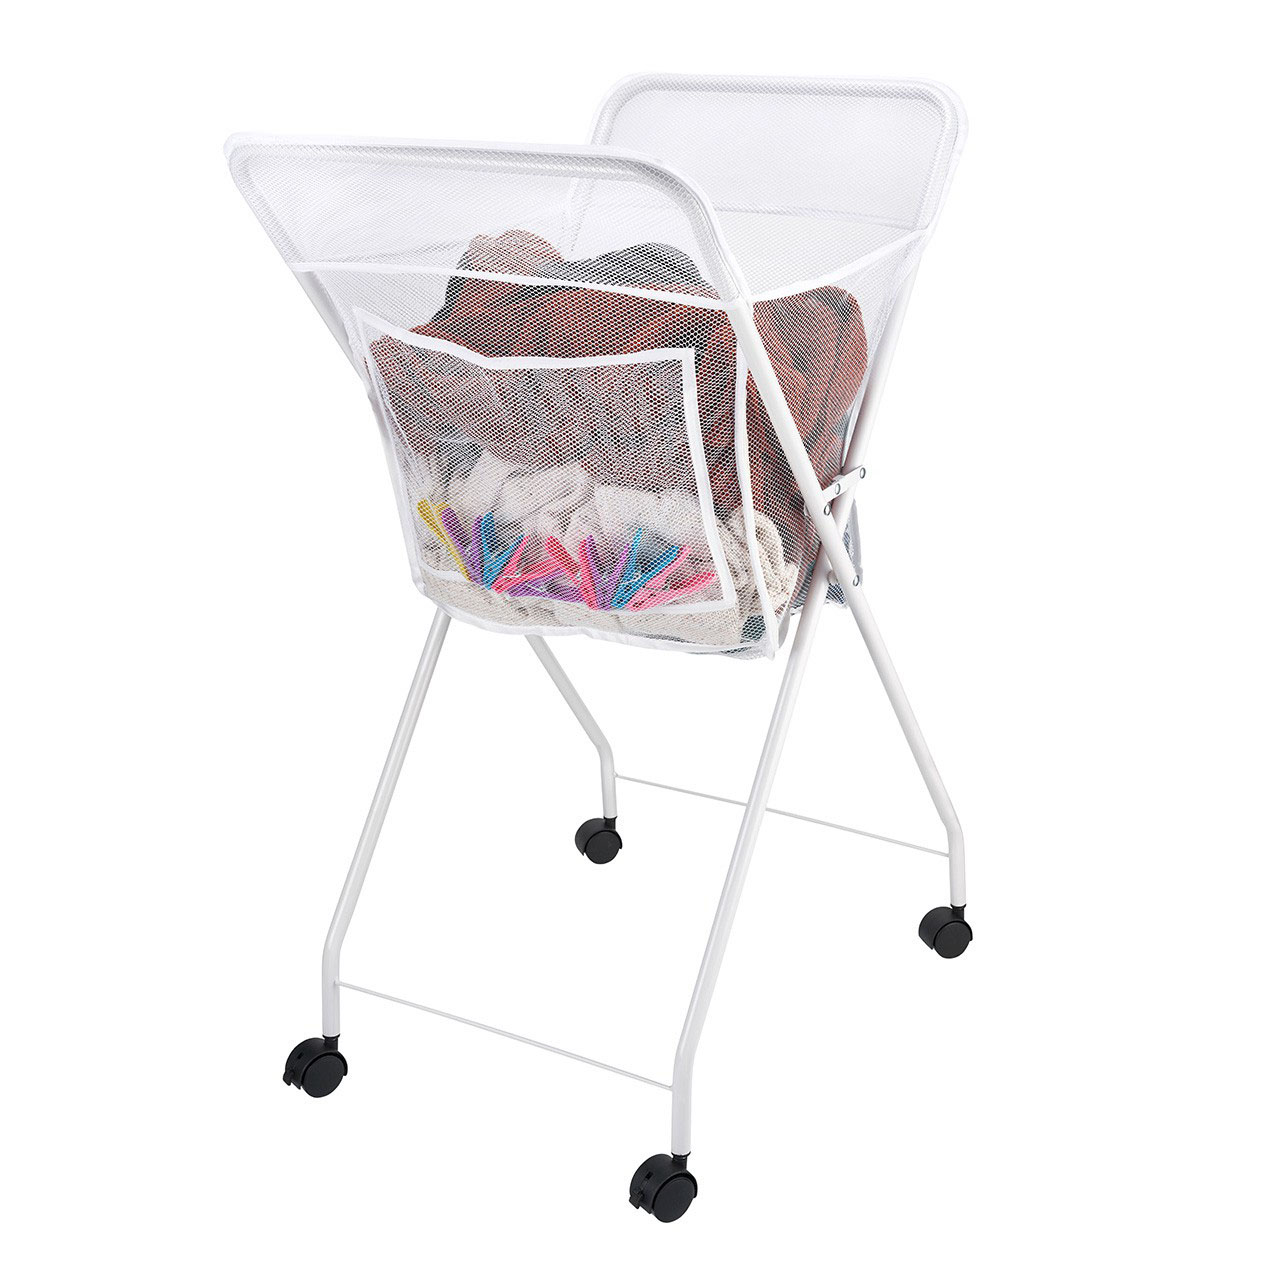 No Bend Laundry Trolley